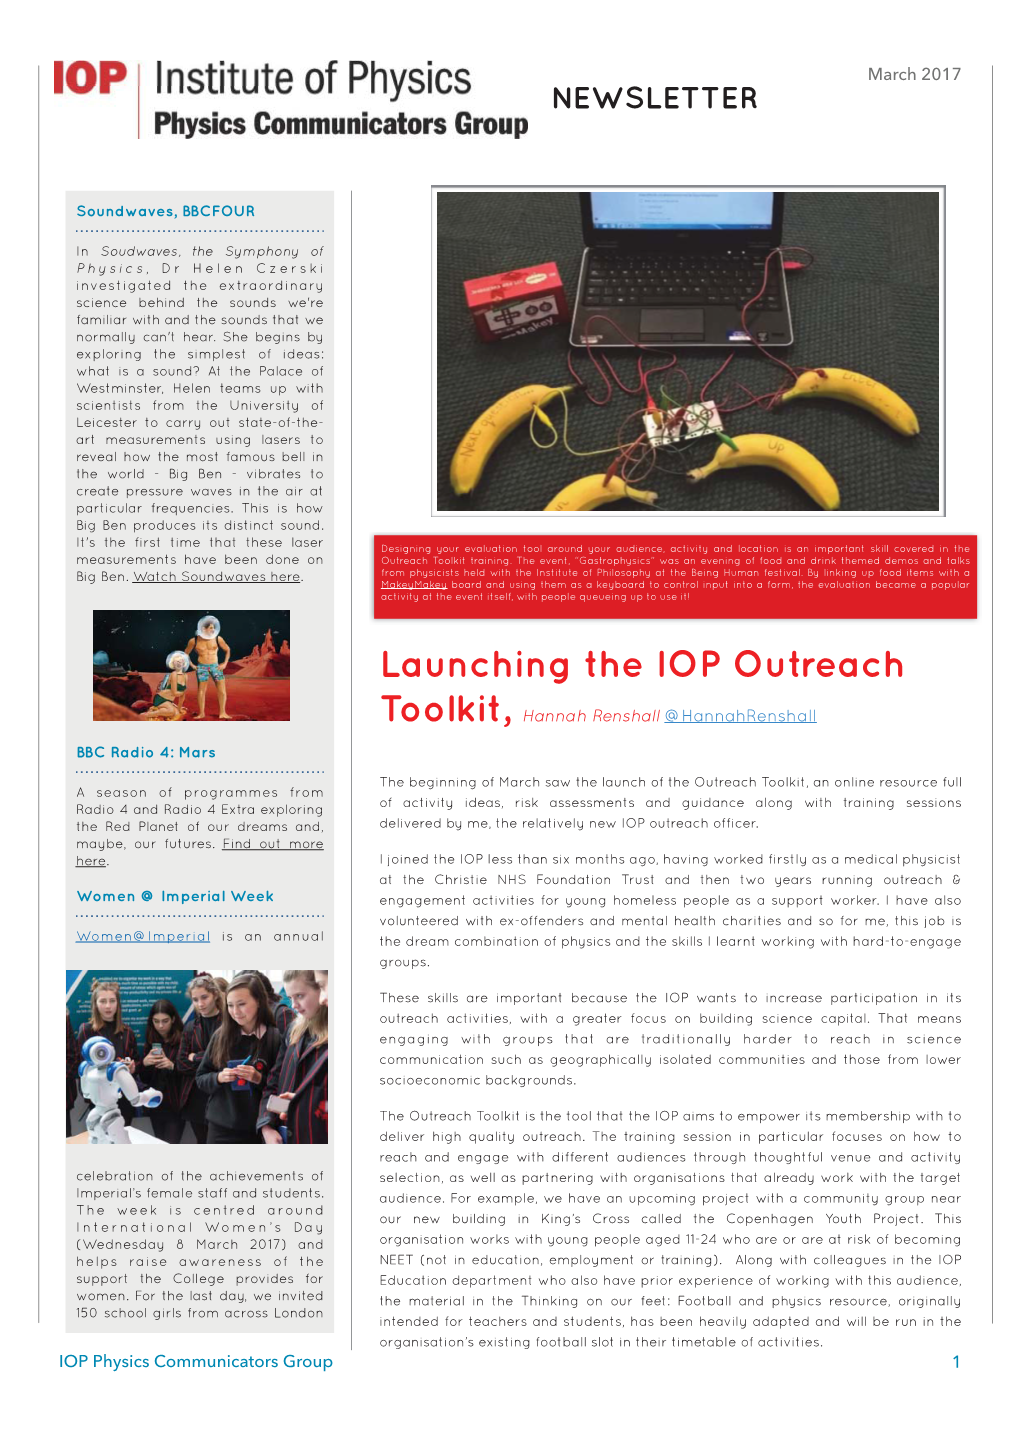 IOP Newsletter March 2017